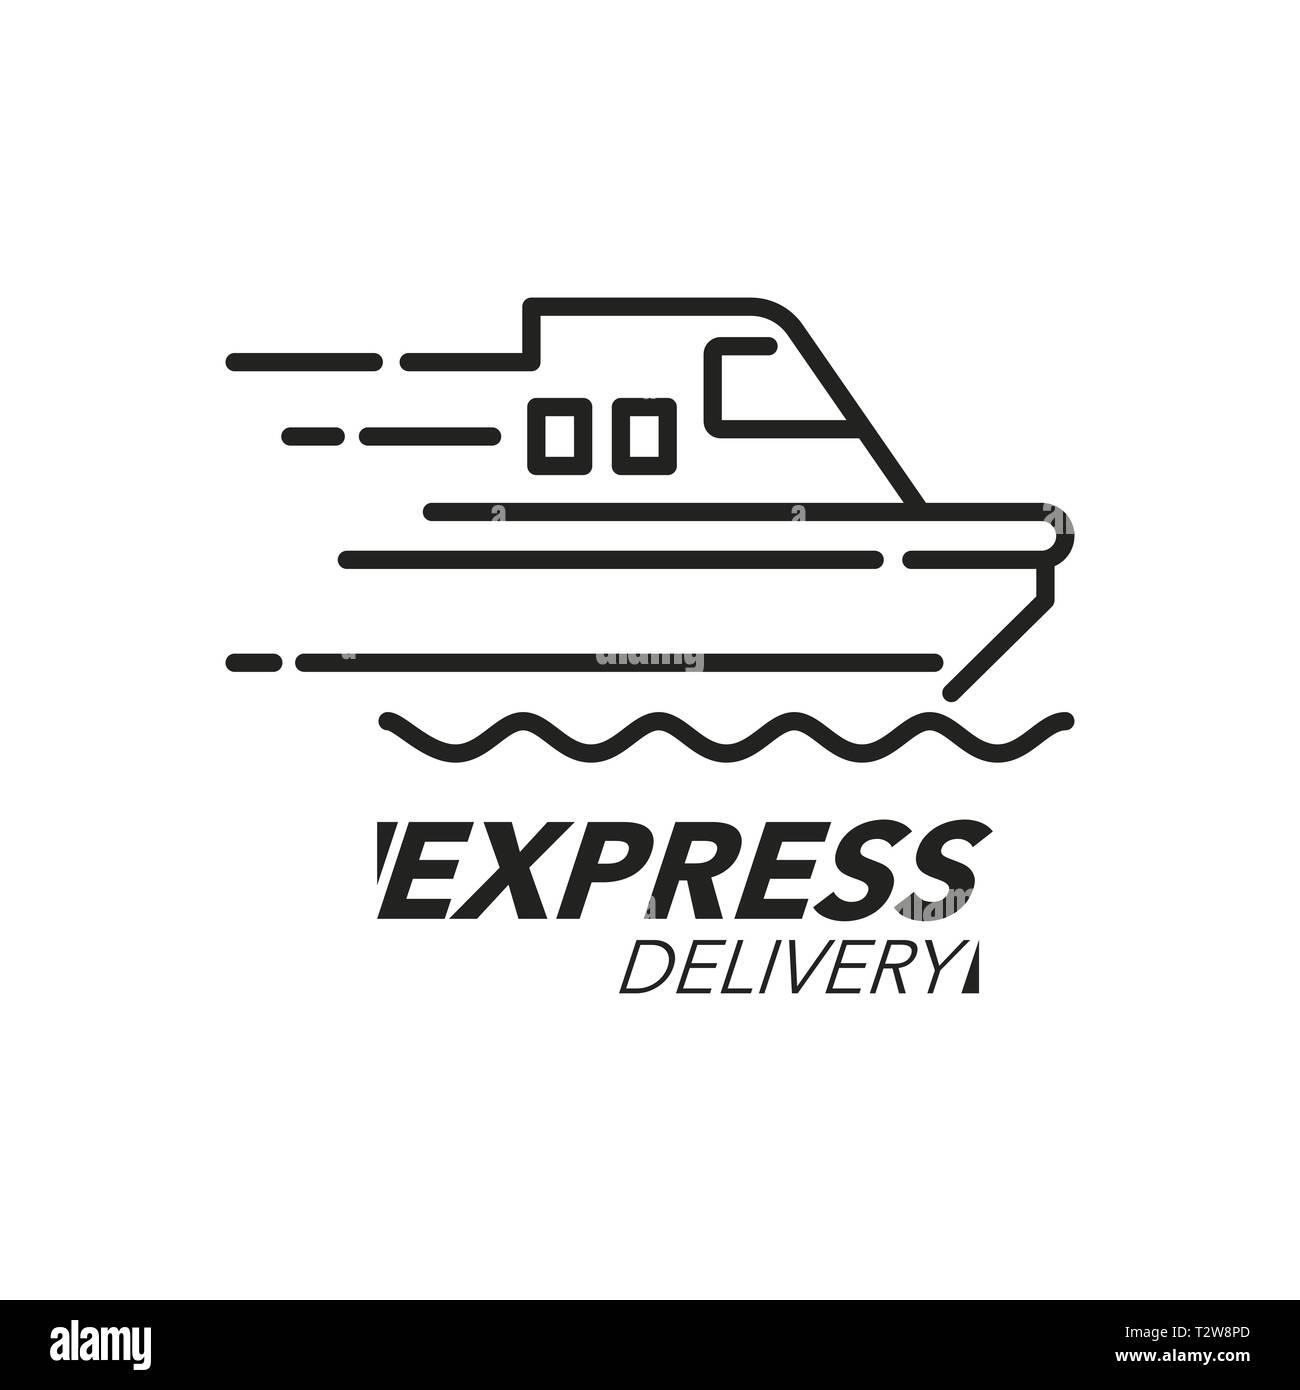 https://c8.alamy.com/comp/T2W8PD/express-delivery-icon-concept-ship-speed-icon-for-service-order-fast-and-worldwide-shipping-modern-design-vector-illustration-T2W8PD.jpg